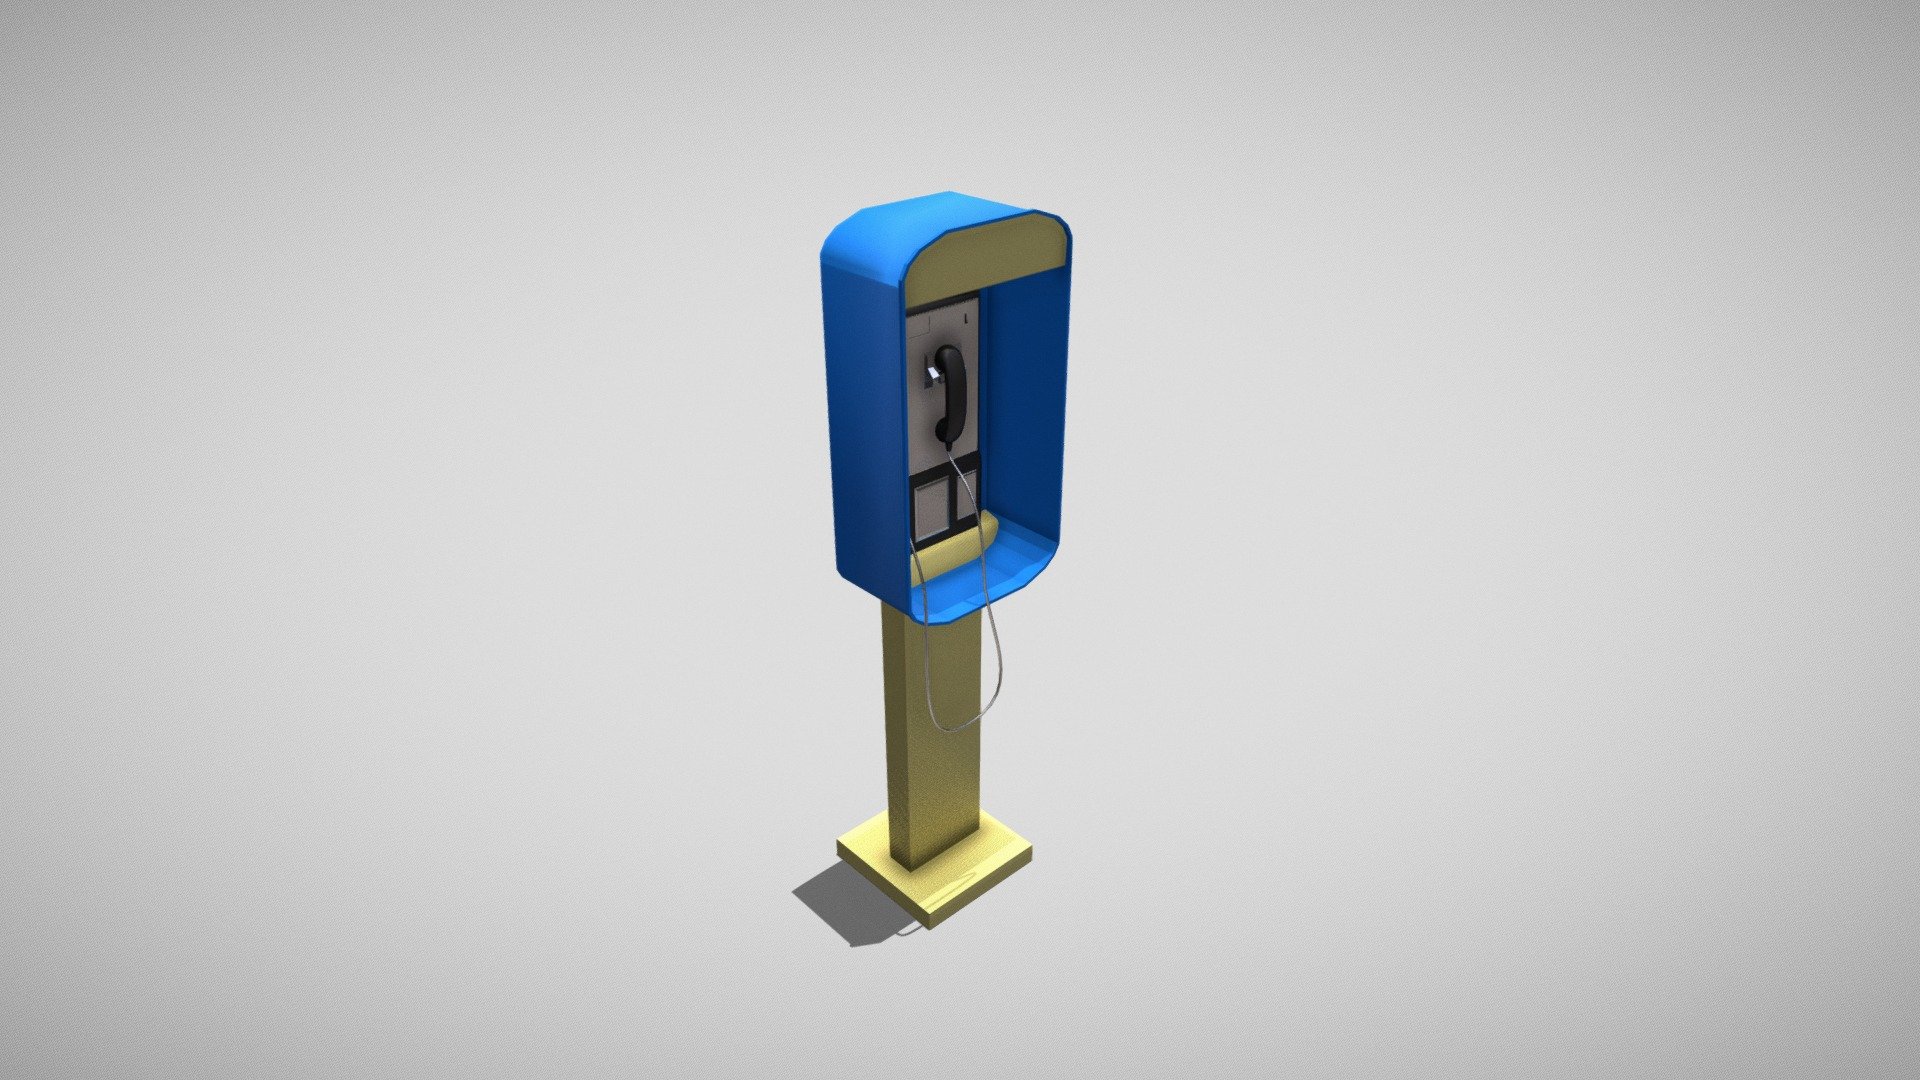 Cartoonish telephone booth.
This model only have materials. No normal map or textures.
Great for simple animation, 3d art or maybe stylized game.

CC Attribution
!Free to use but it would be nice to give some credit! - Cartoon Telephone booth - Download Free 3D model by SamRi (@Samiri) 3d model